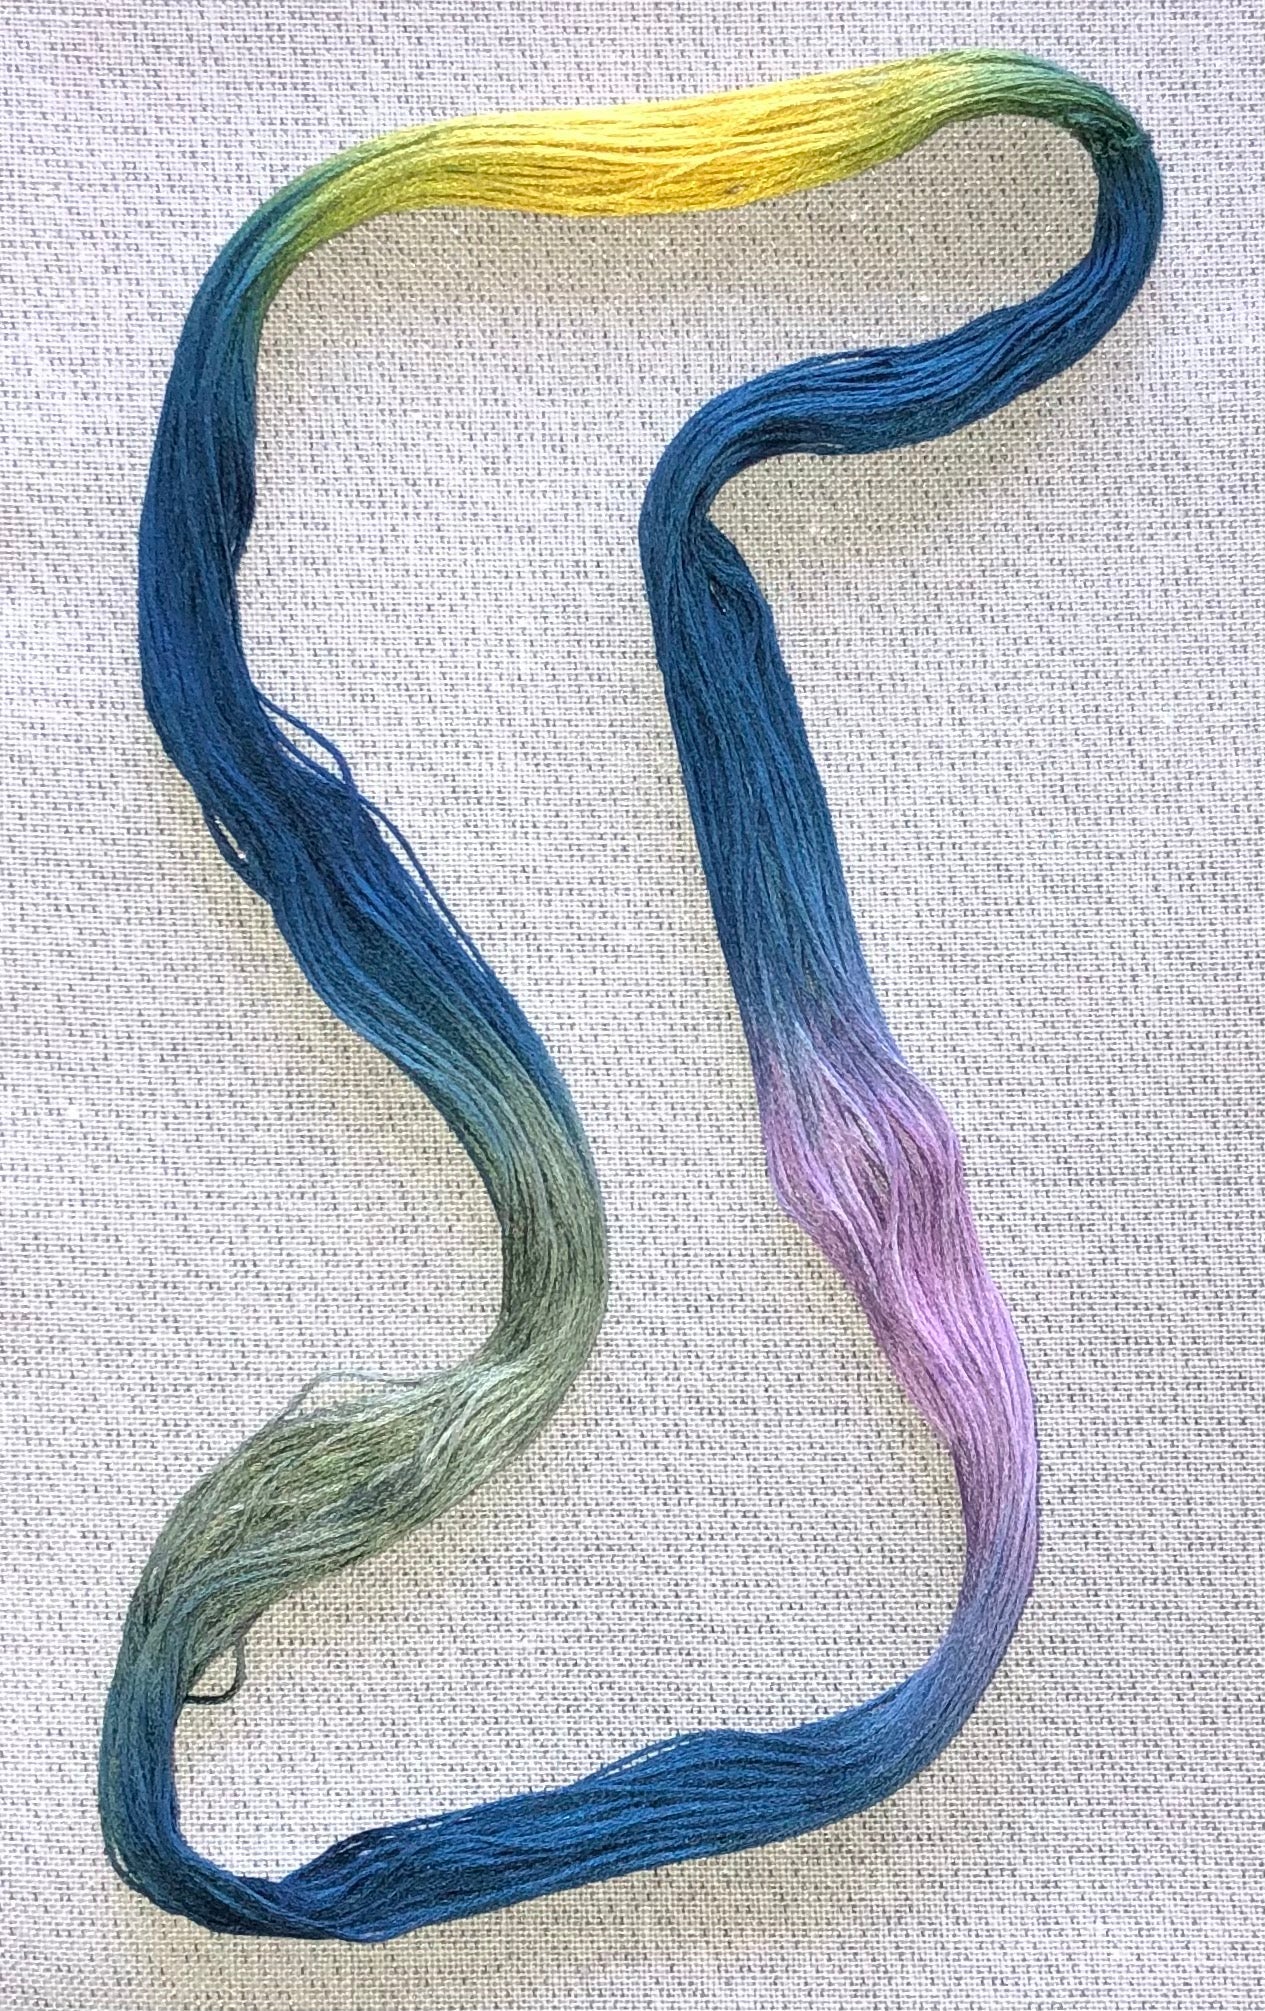 Silk hand dyed floss - Mountainside - Dyeing for Cross Stitch